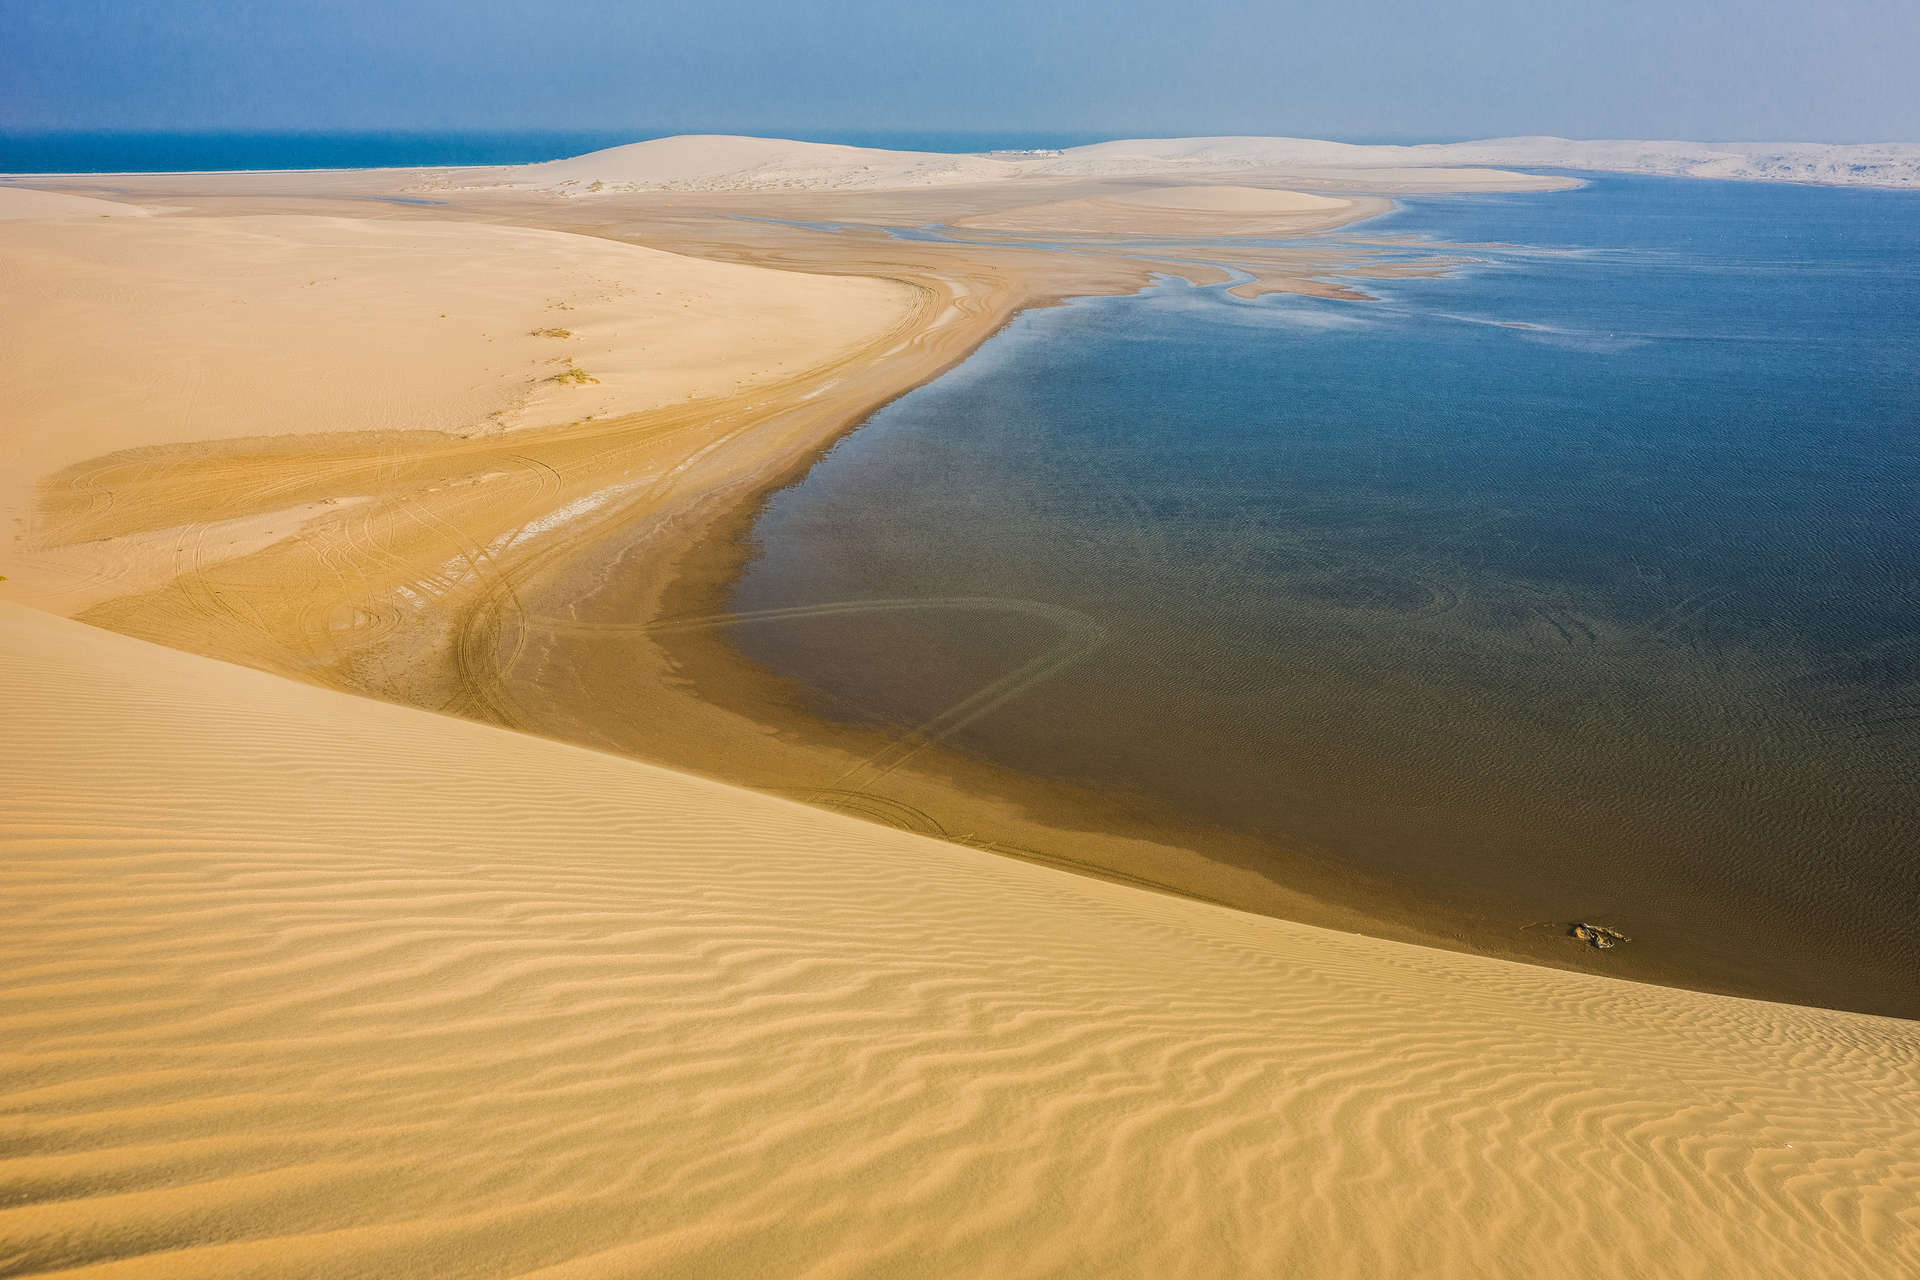 Khor al Adaid, the Inland Sea, is a seawater inlet right at the bottom end of the Qatar peninsula